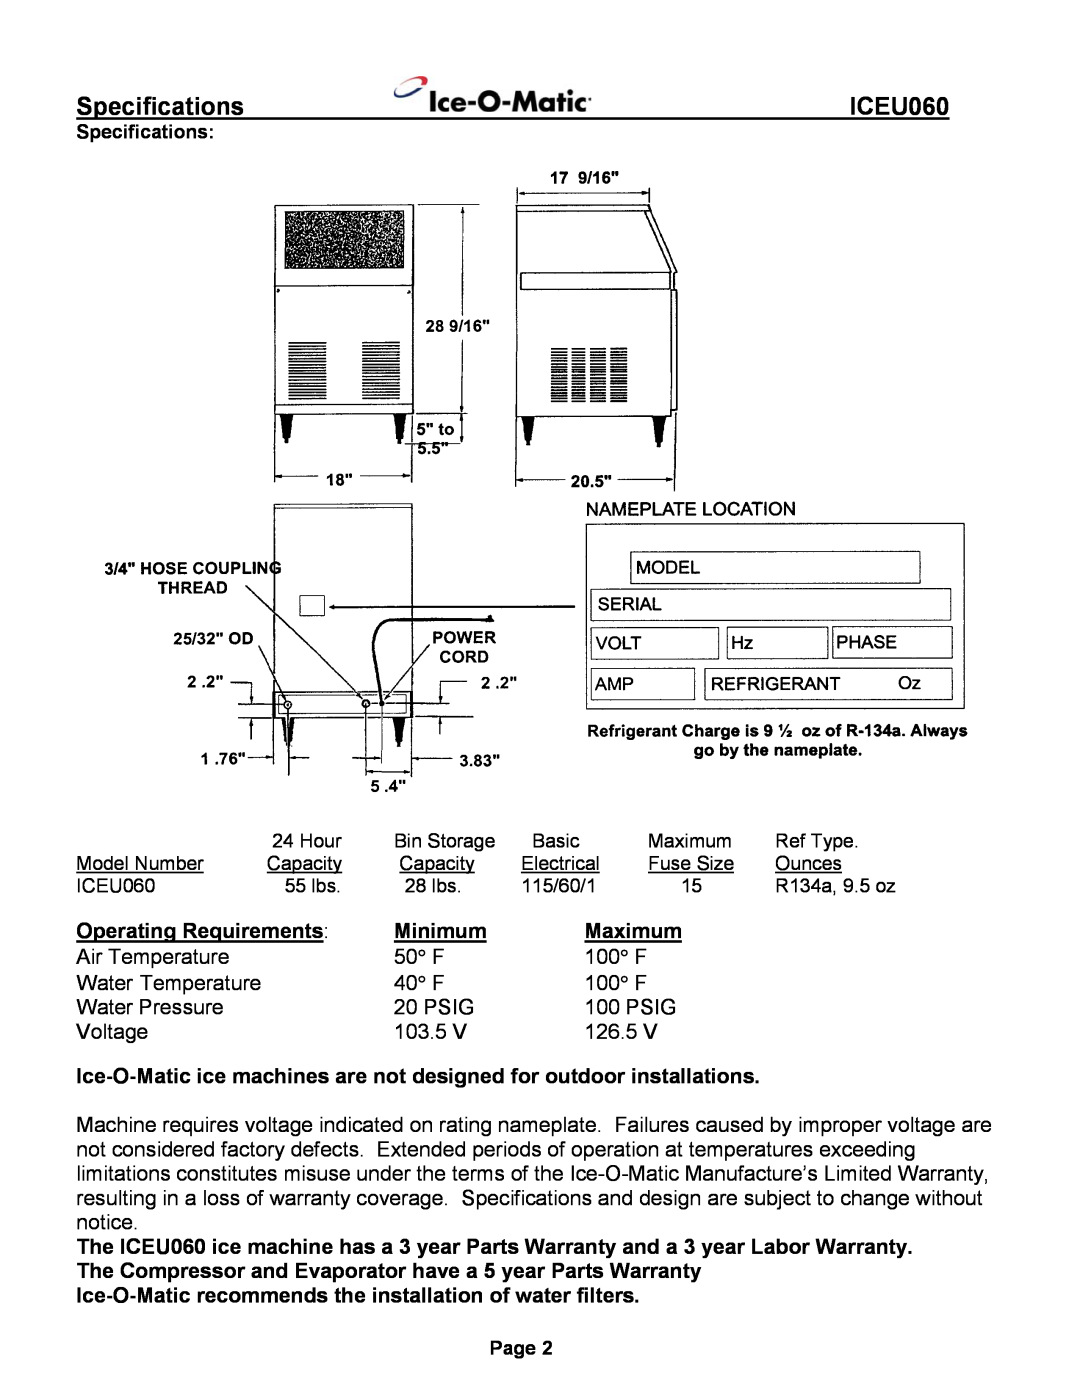 Ice-O-Matic ICEU060 installation manual Specifications 